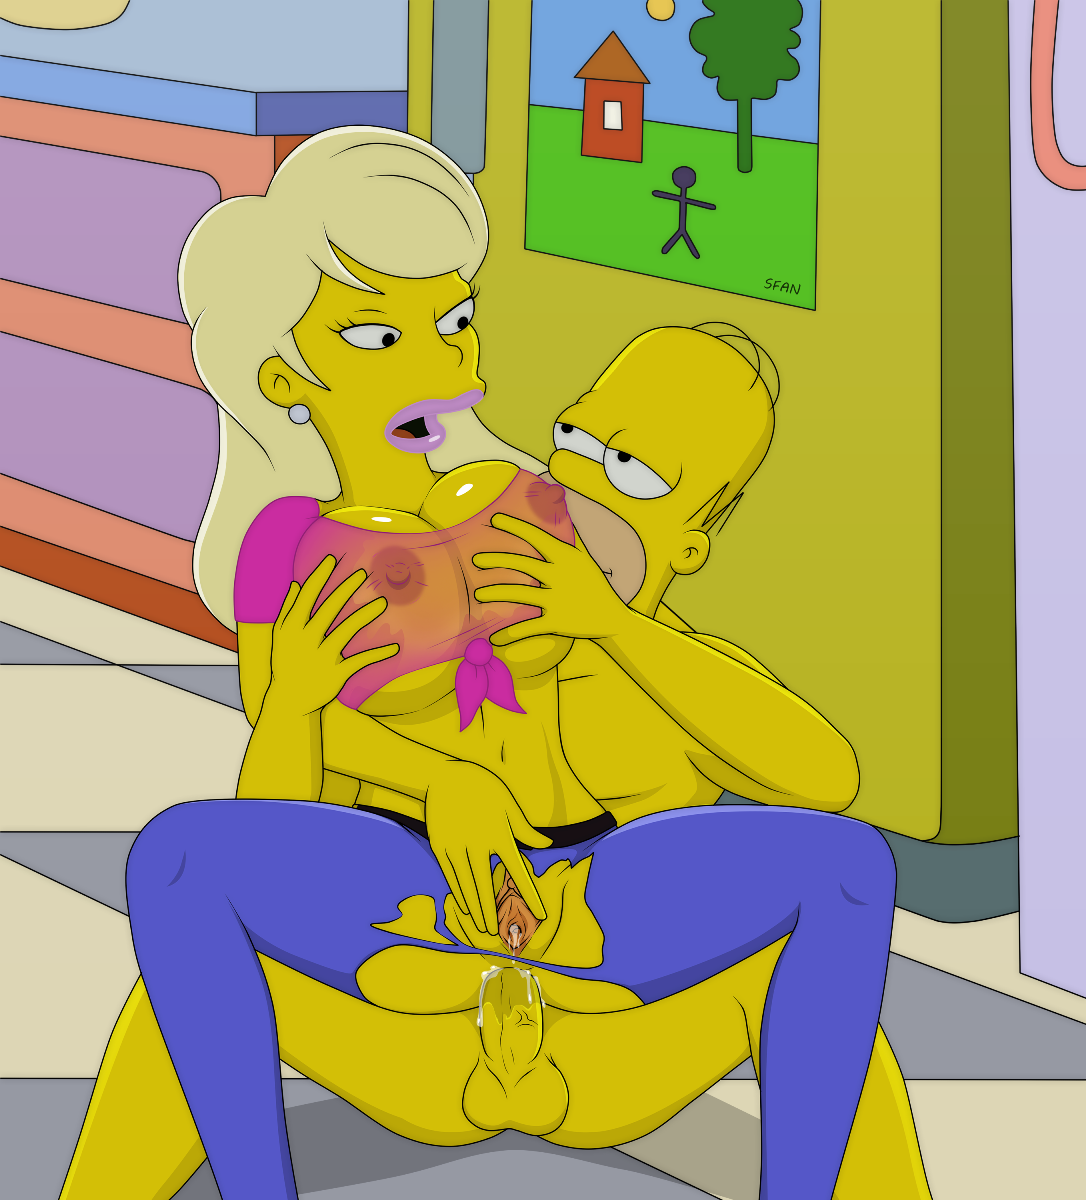 1783873_Homer_Simpson_Sfan_The_Simpsons_Titania.png